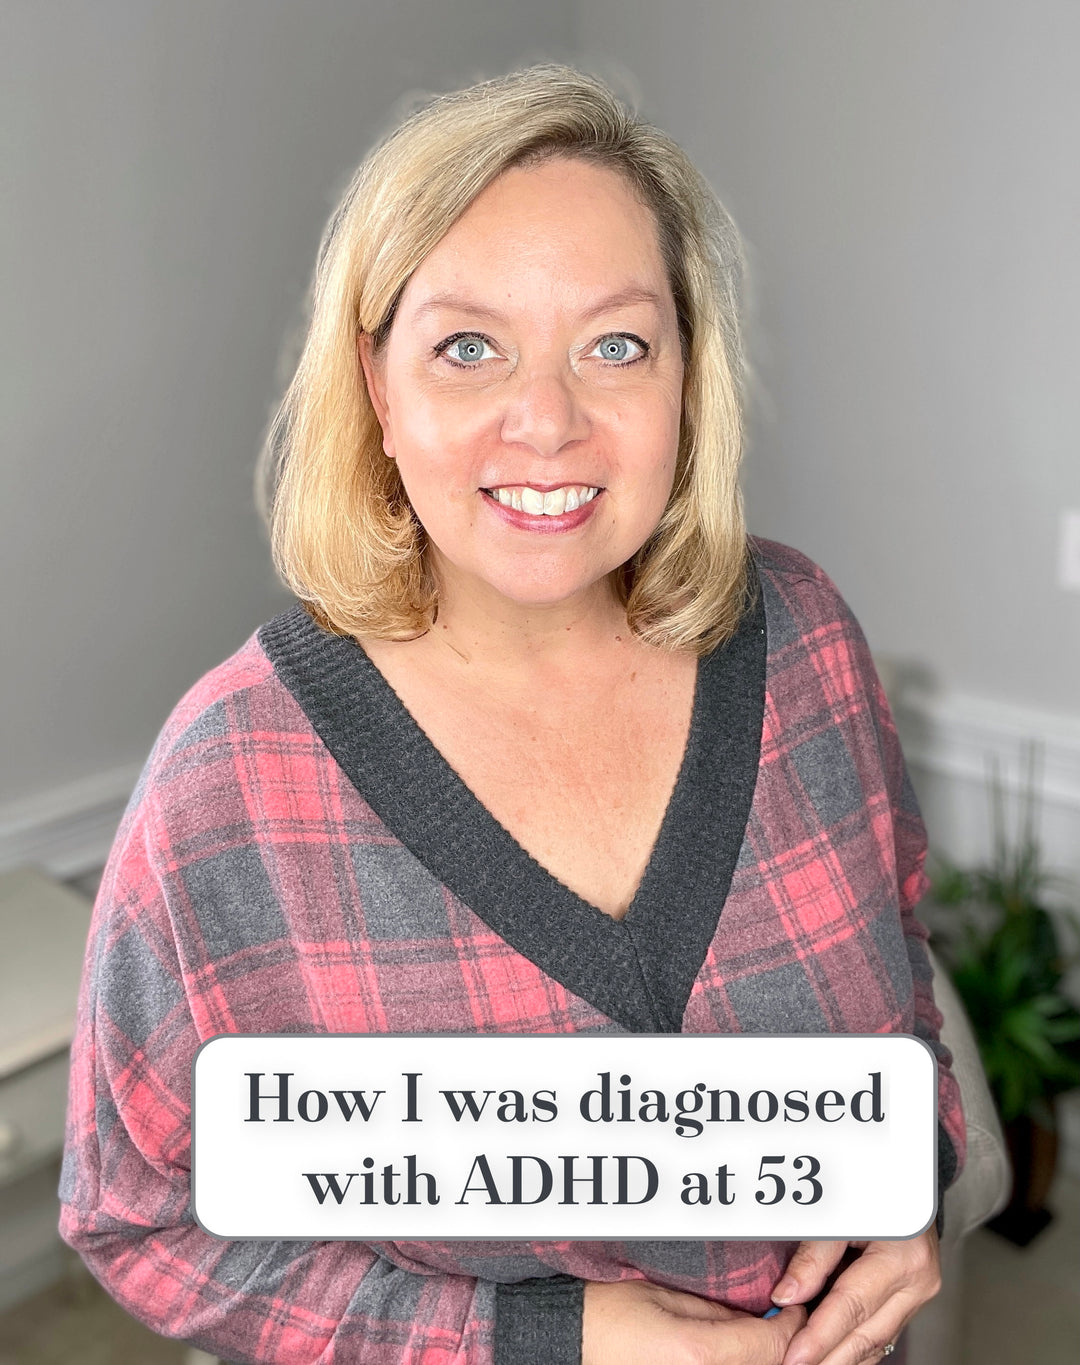 How I was diagnosed with ADHD at 53